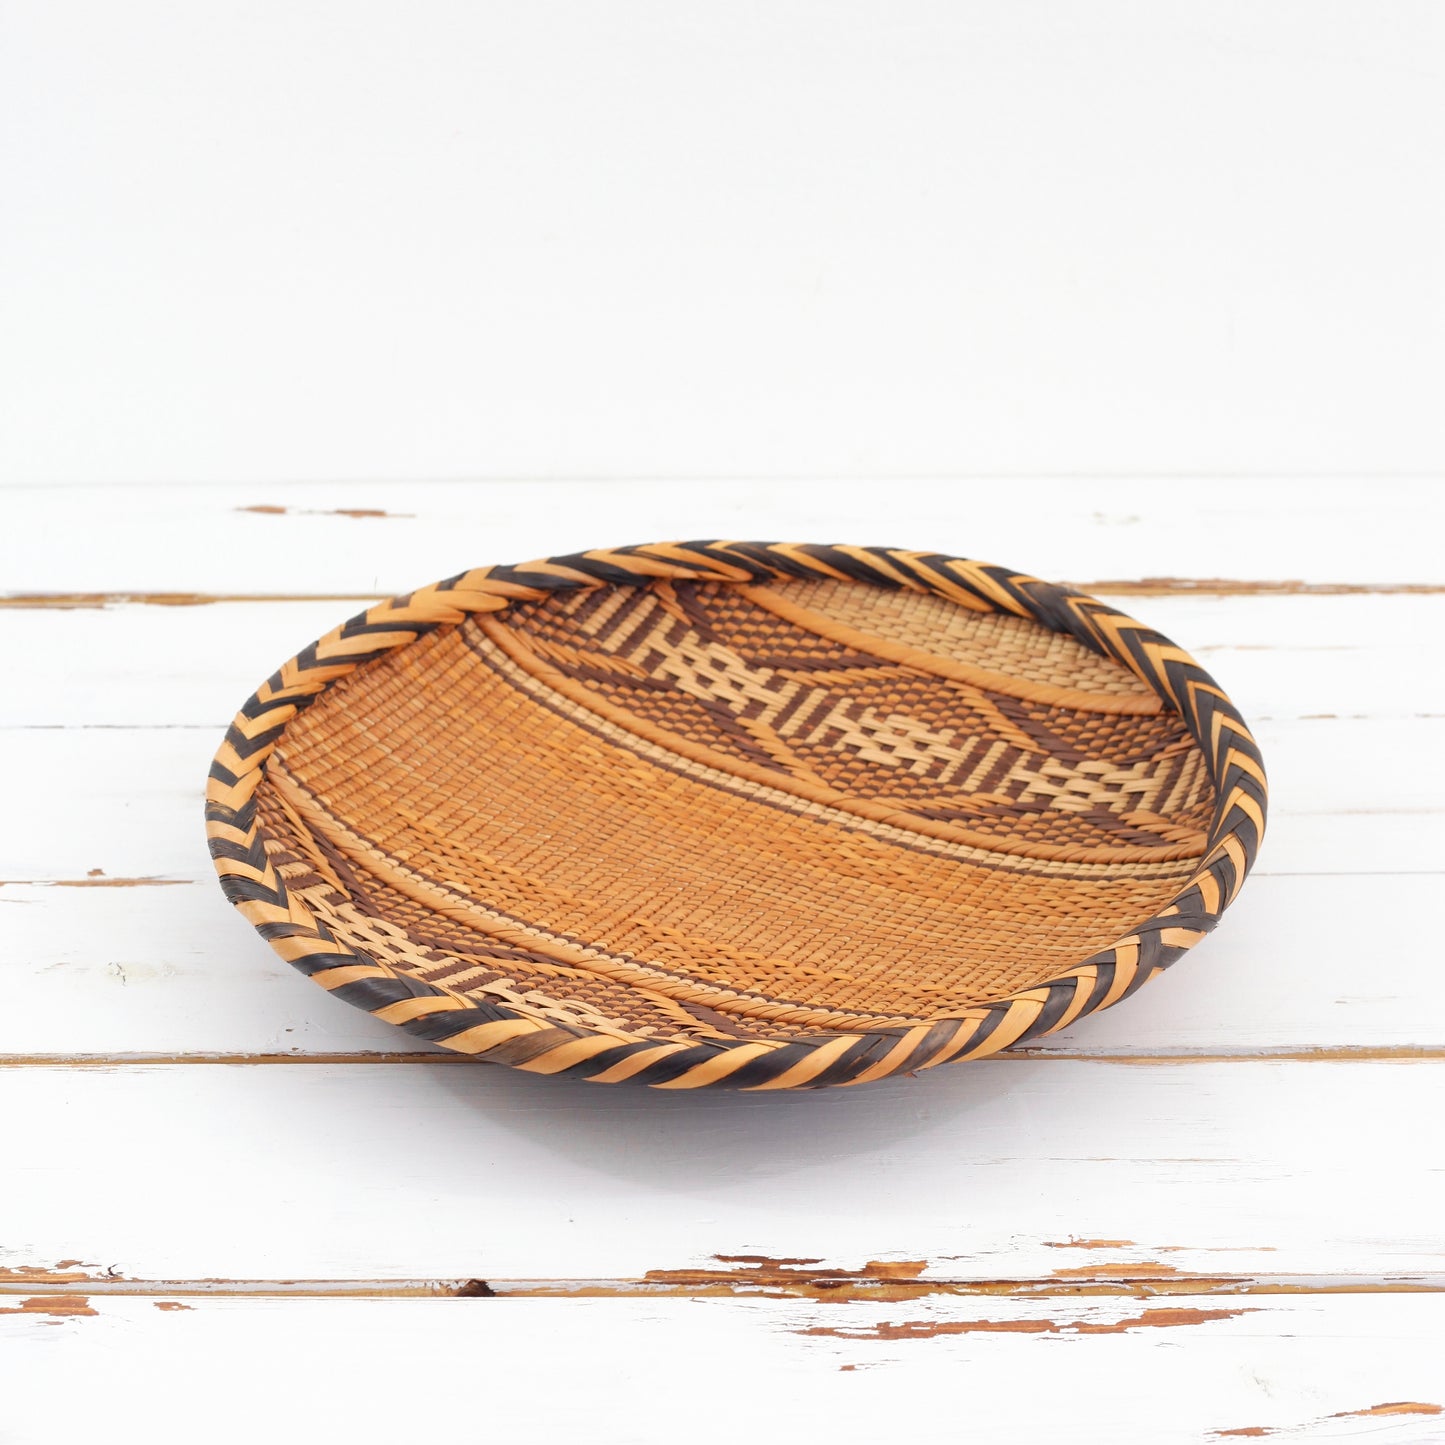 SOLD - Vintage Woven Basket Tray